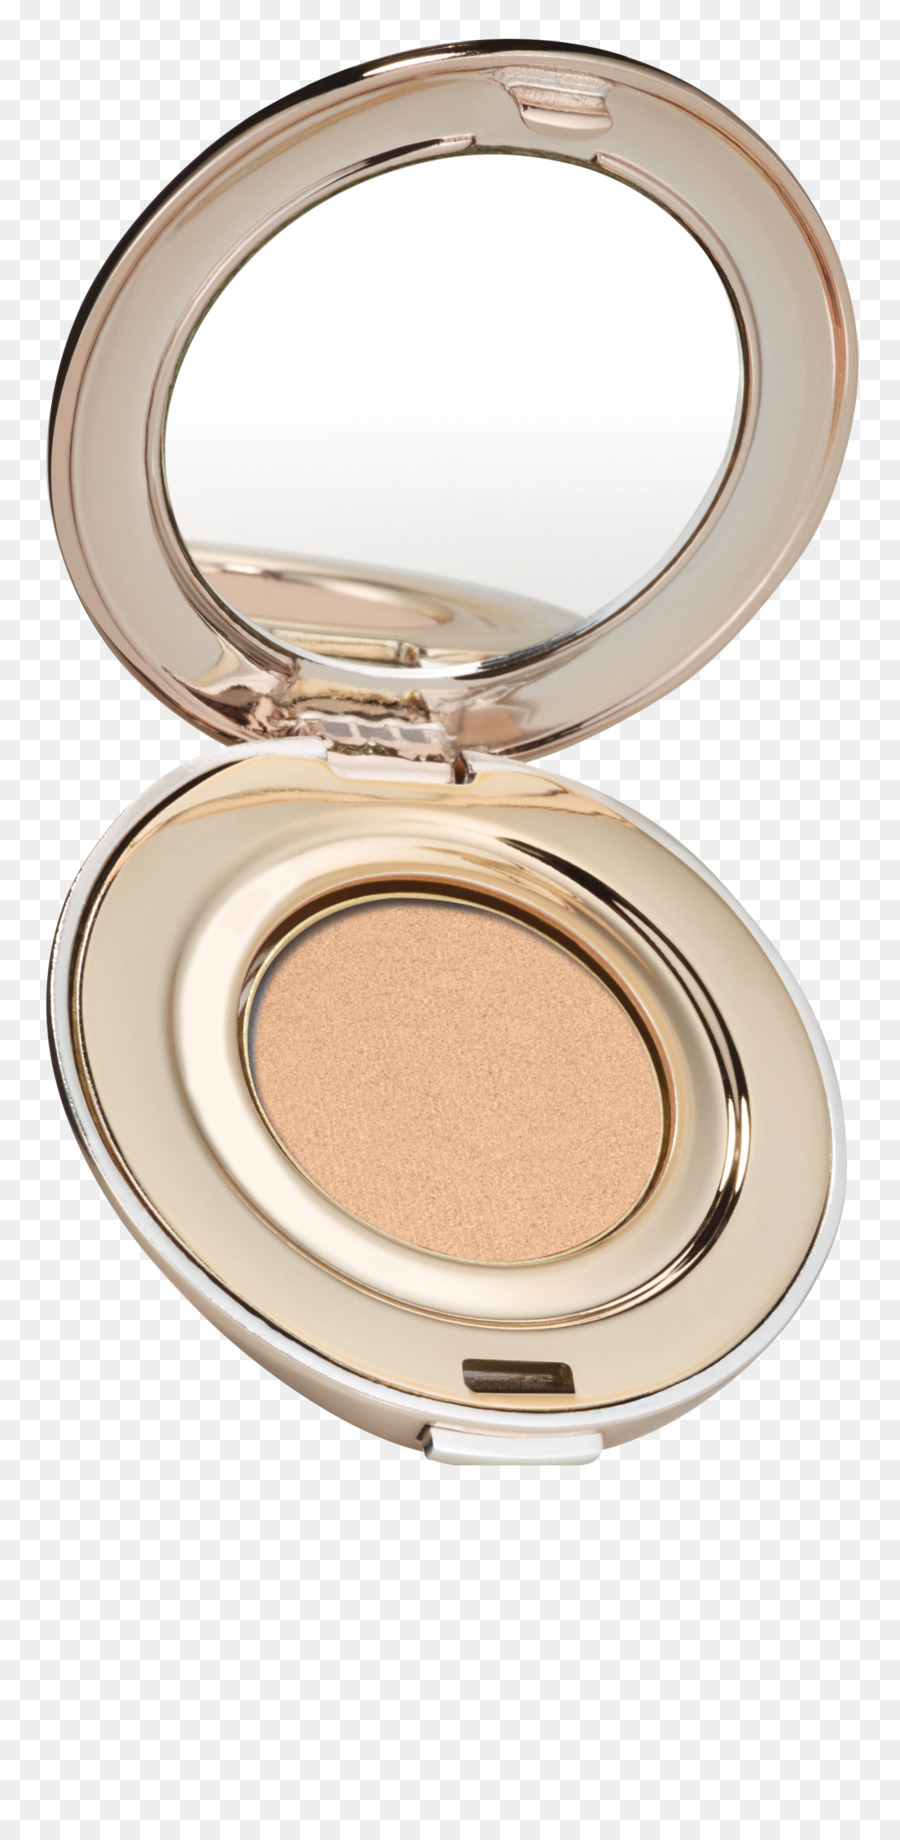 Jane Iredale Purepressed Sombra，A Sombra Do Olho PNG